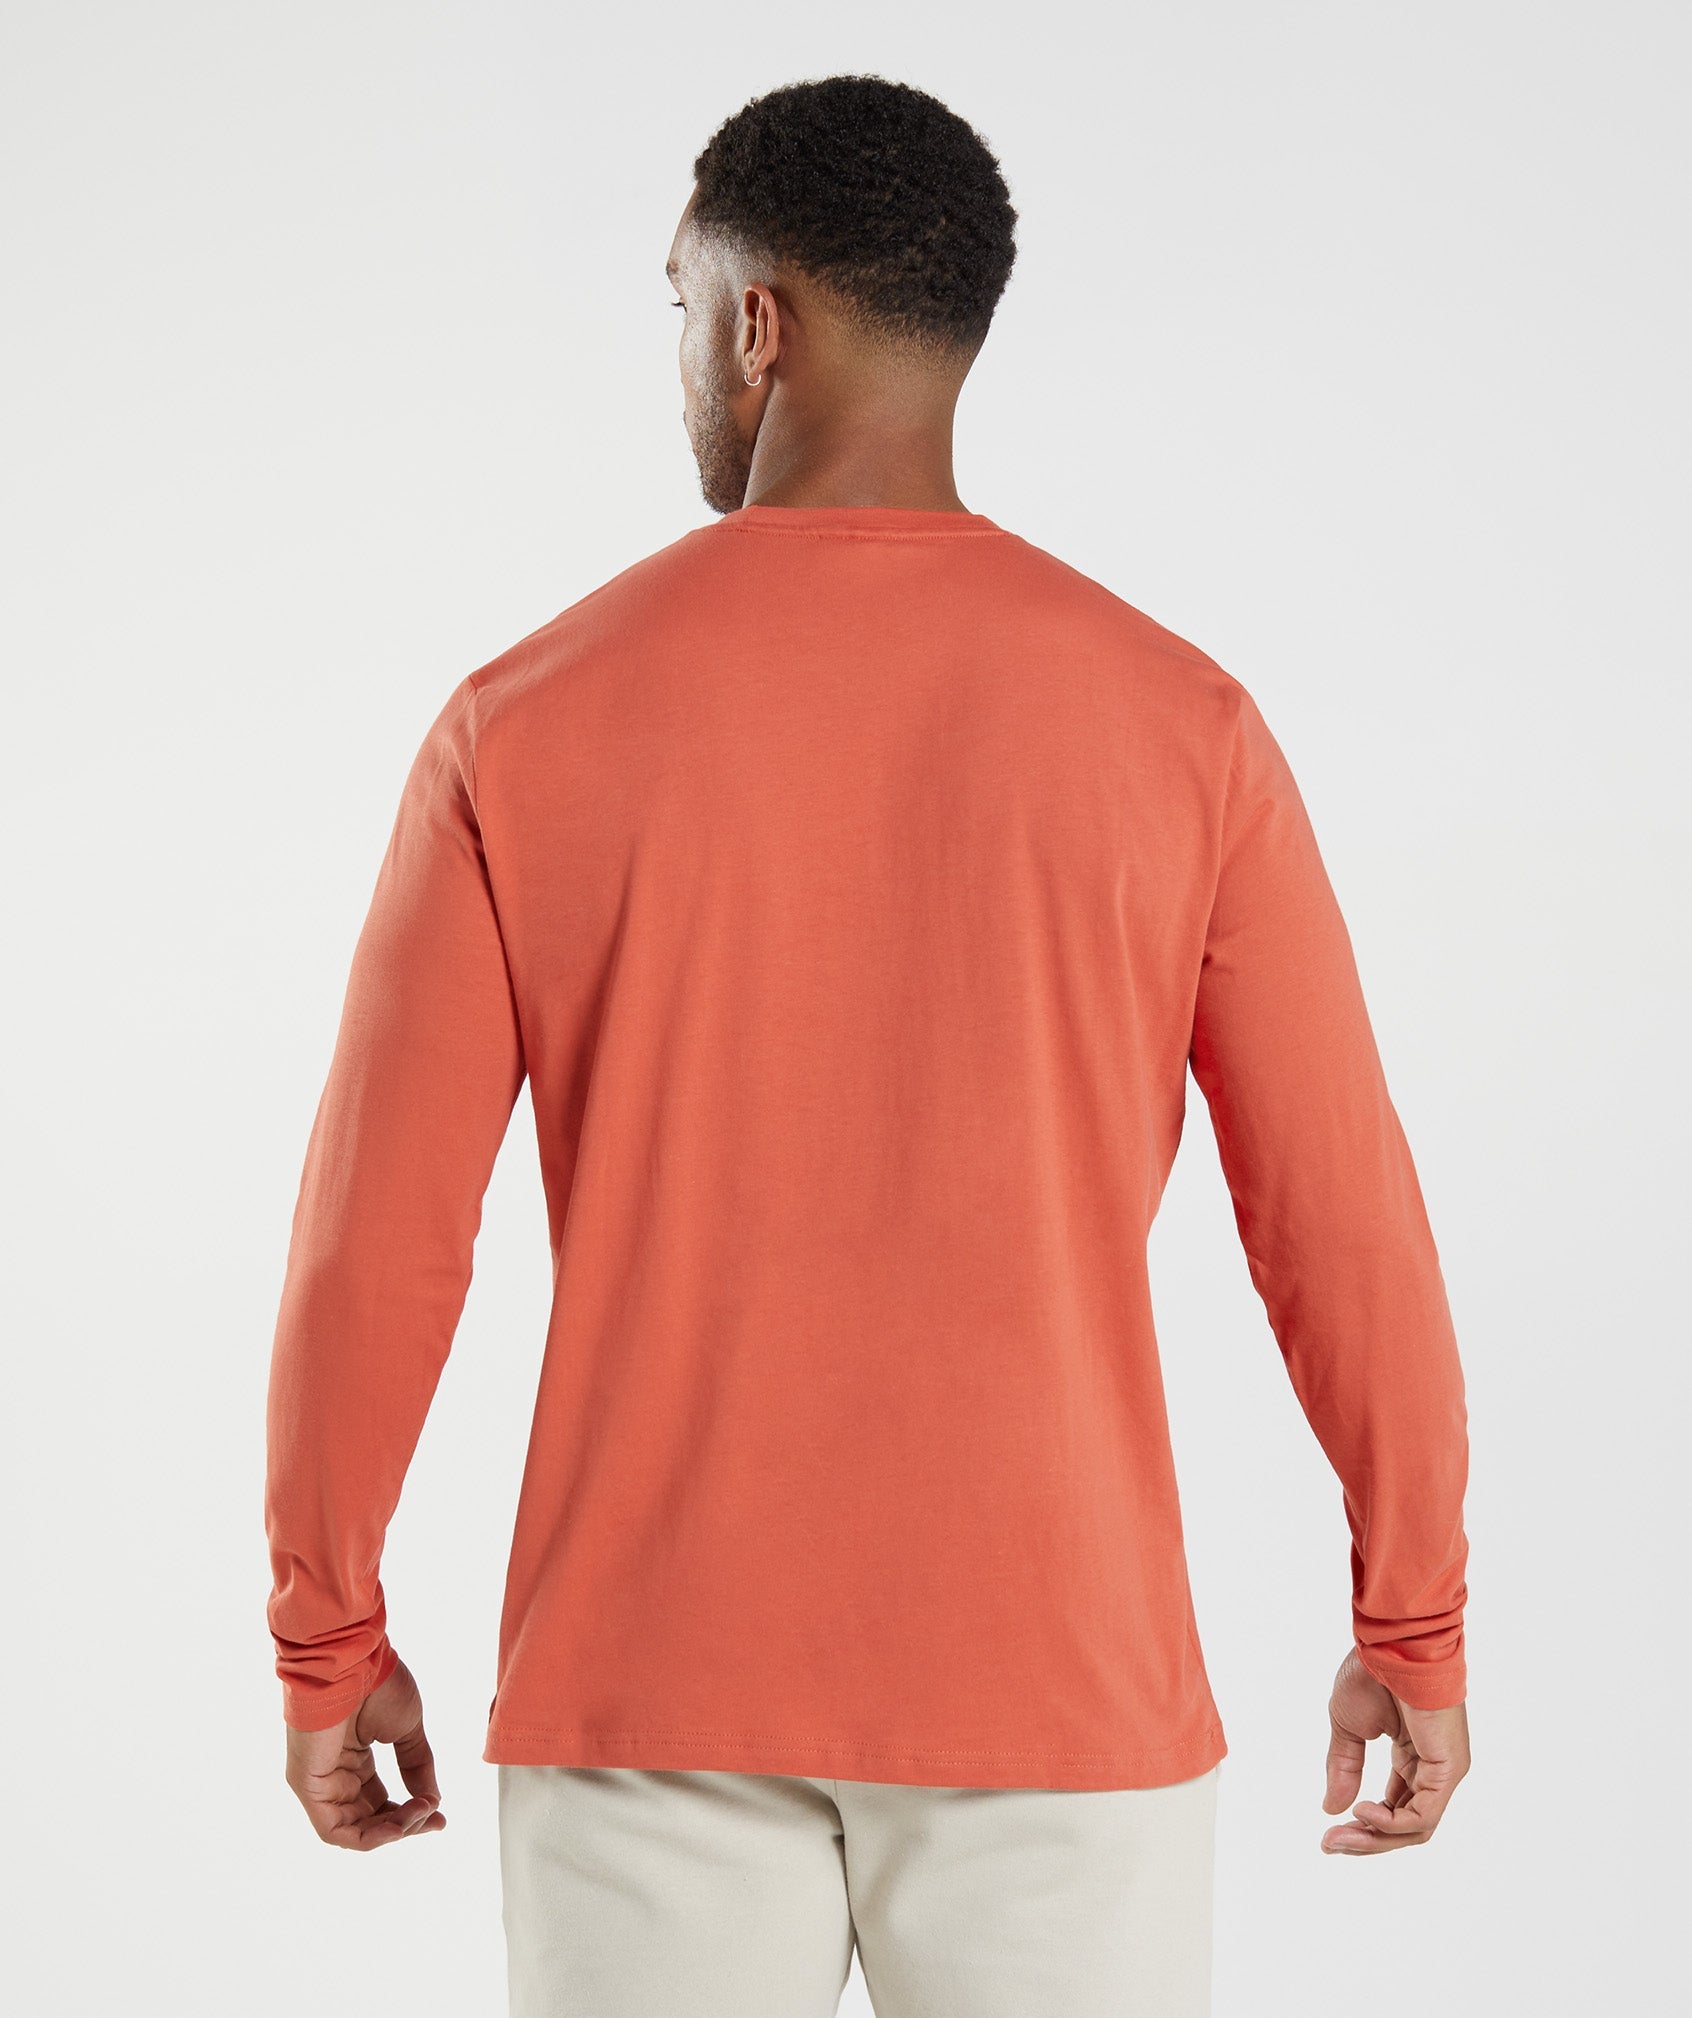 Crest Long Sleeve T-Shirt in Storm Red